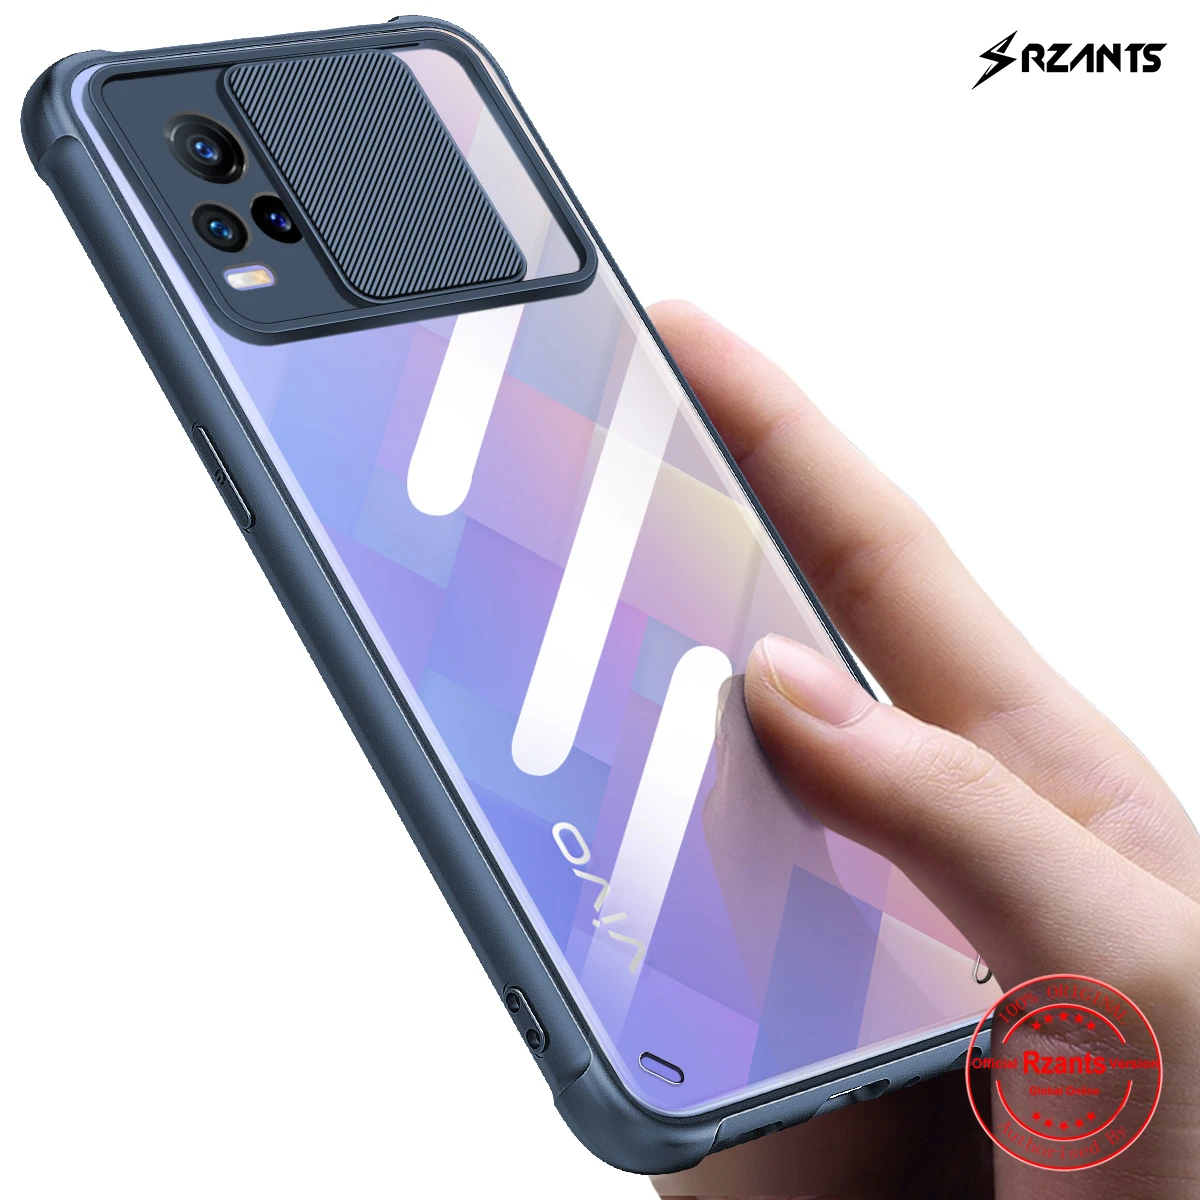 

Rzants For VIVO V21E 4G V21 V20 V23 Pro Case Soft [Lens Protection] Air Bag Conor Clear Shockproof Cover Phone Casing